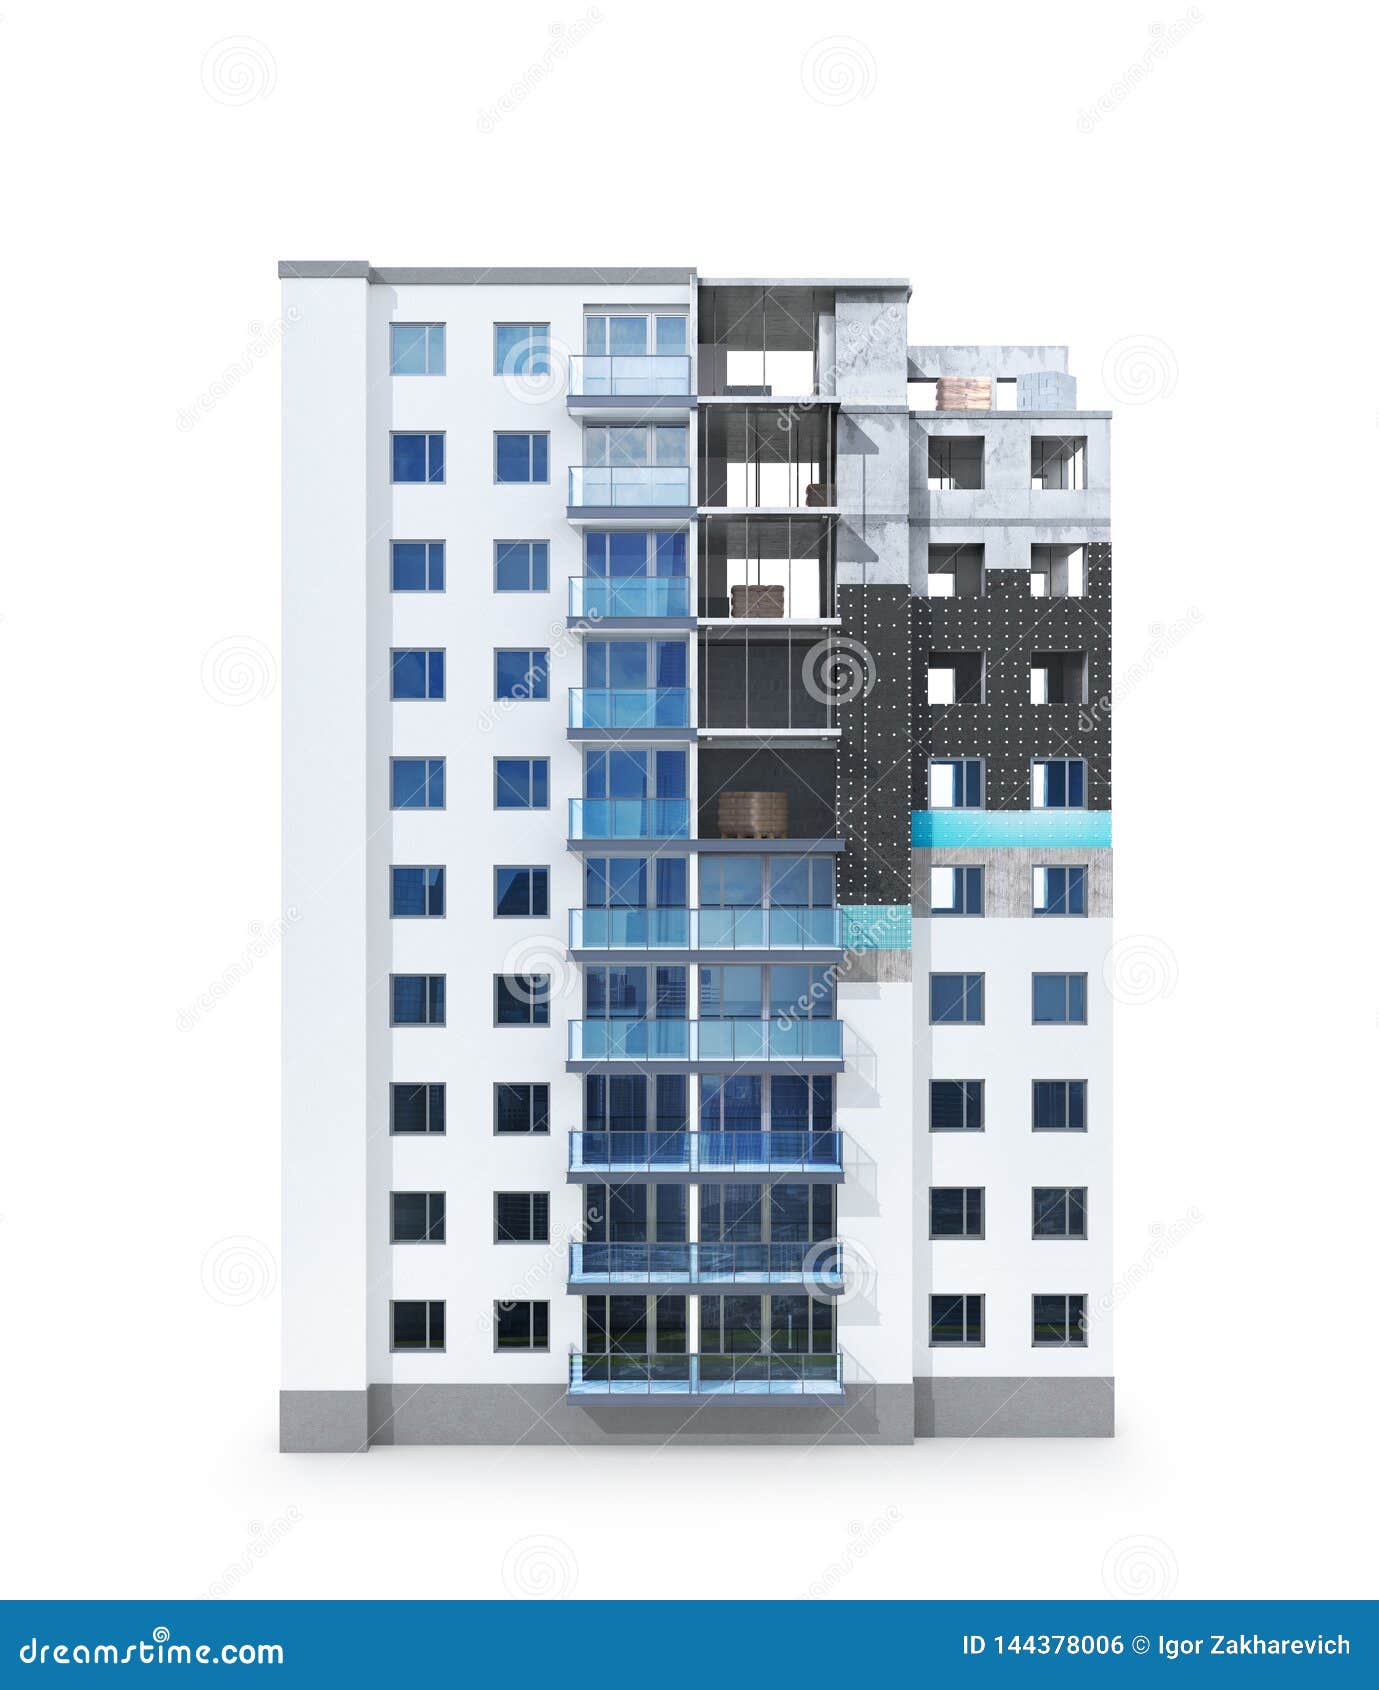 concept of building a residential house, the scheme of warming the facade of a high-rise building